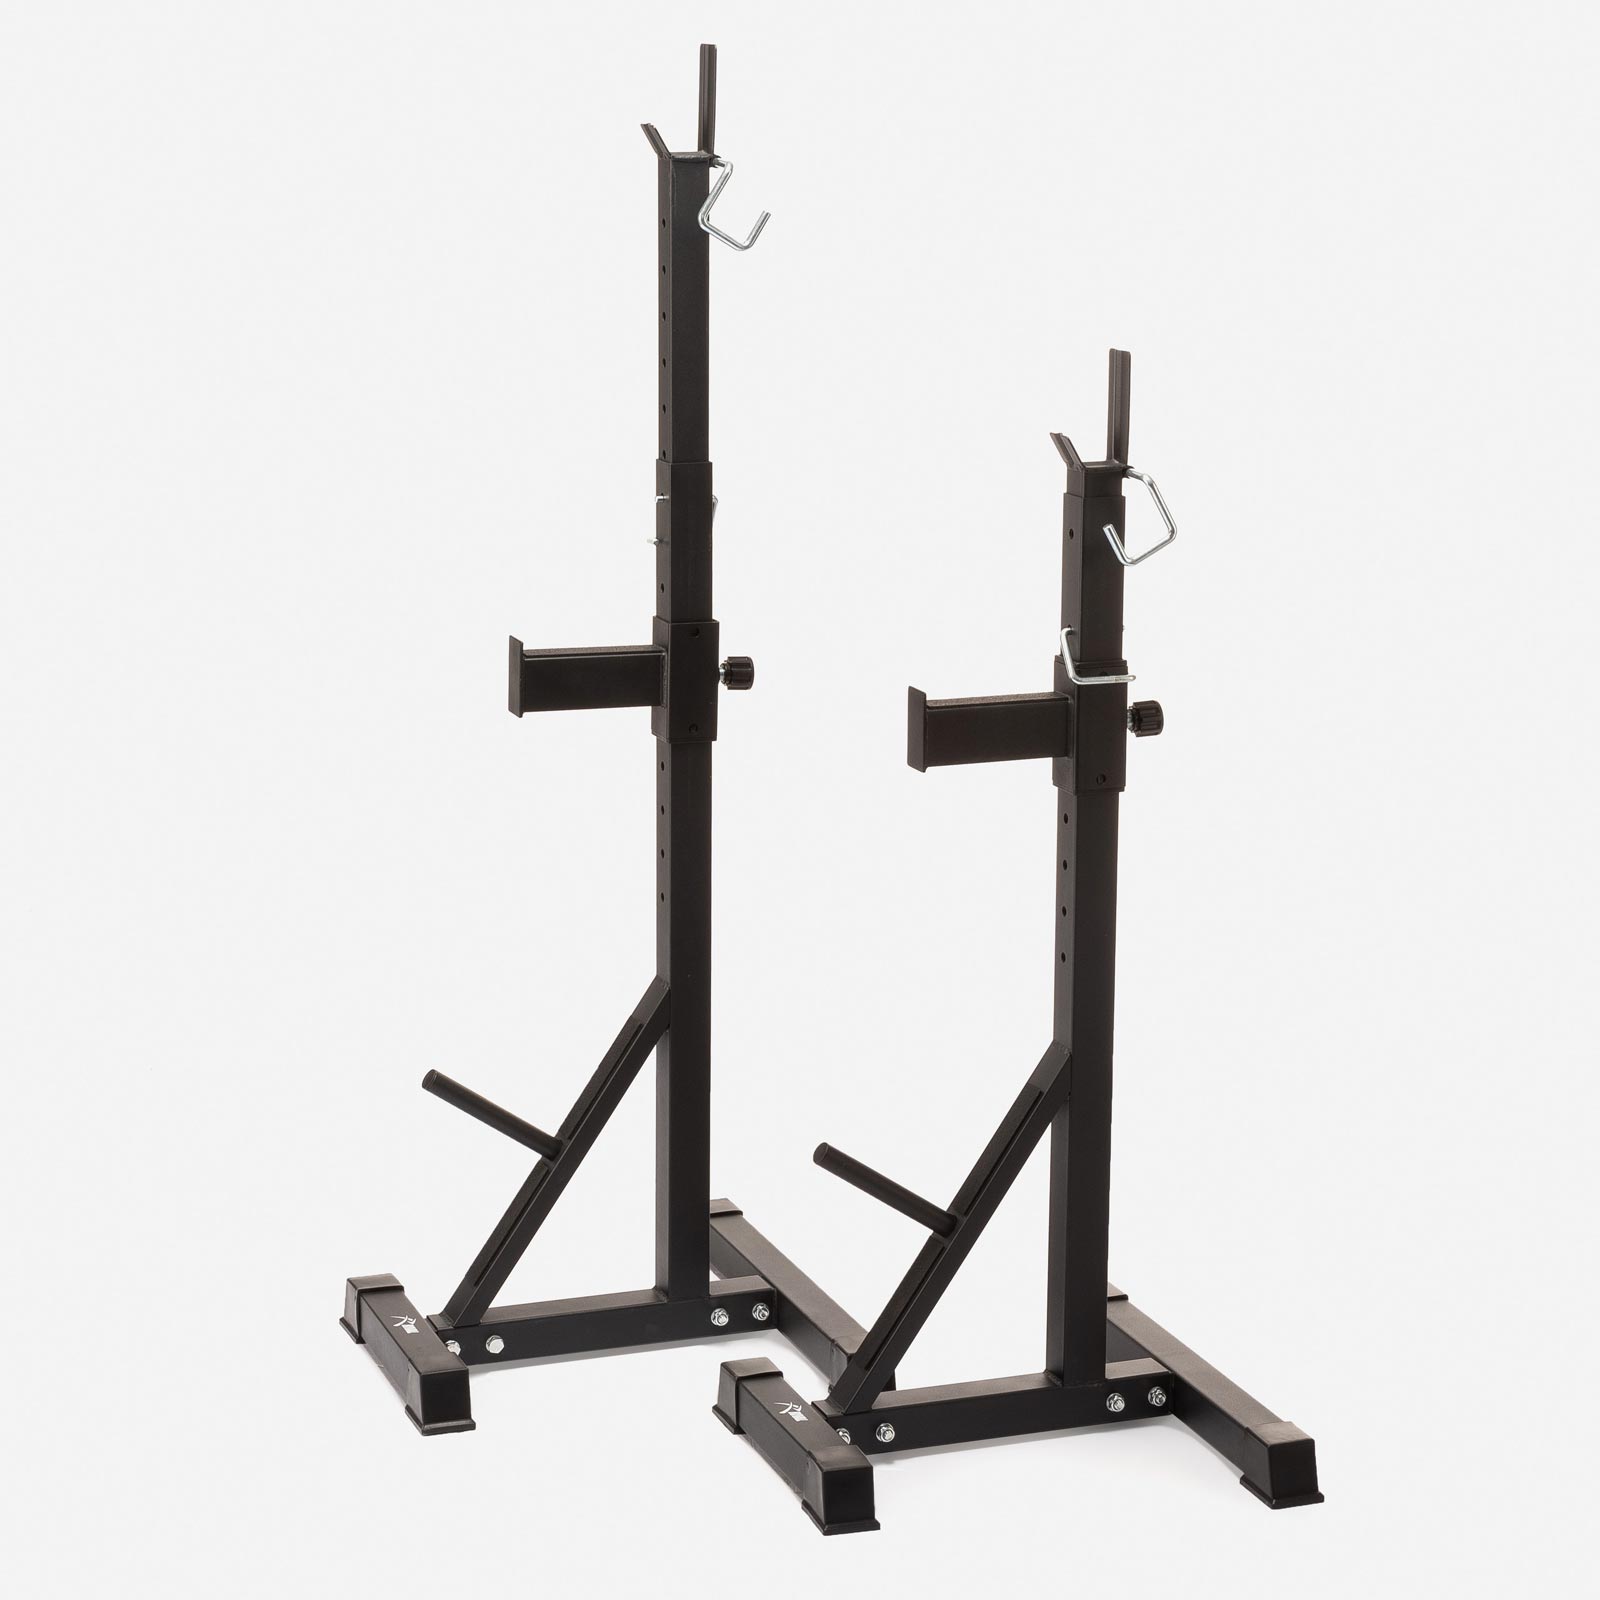 RIVAL SQUAT RACK STANDS